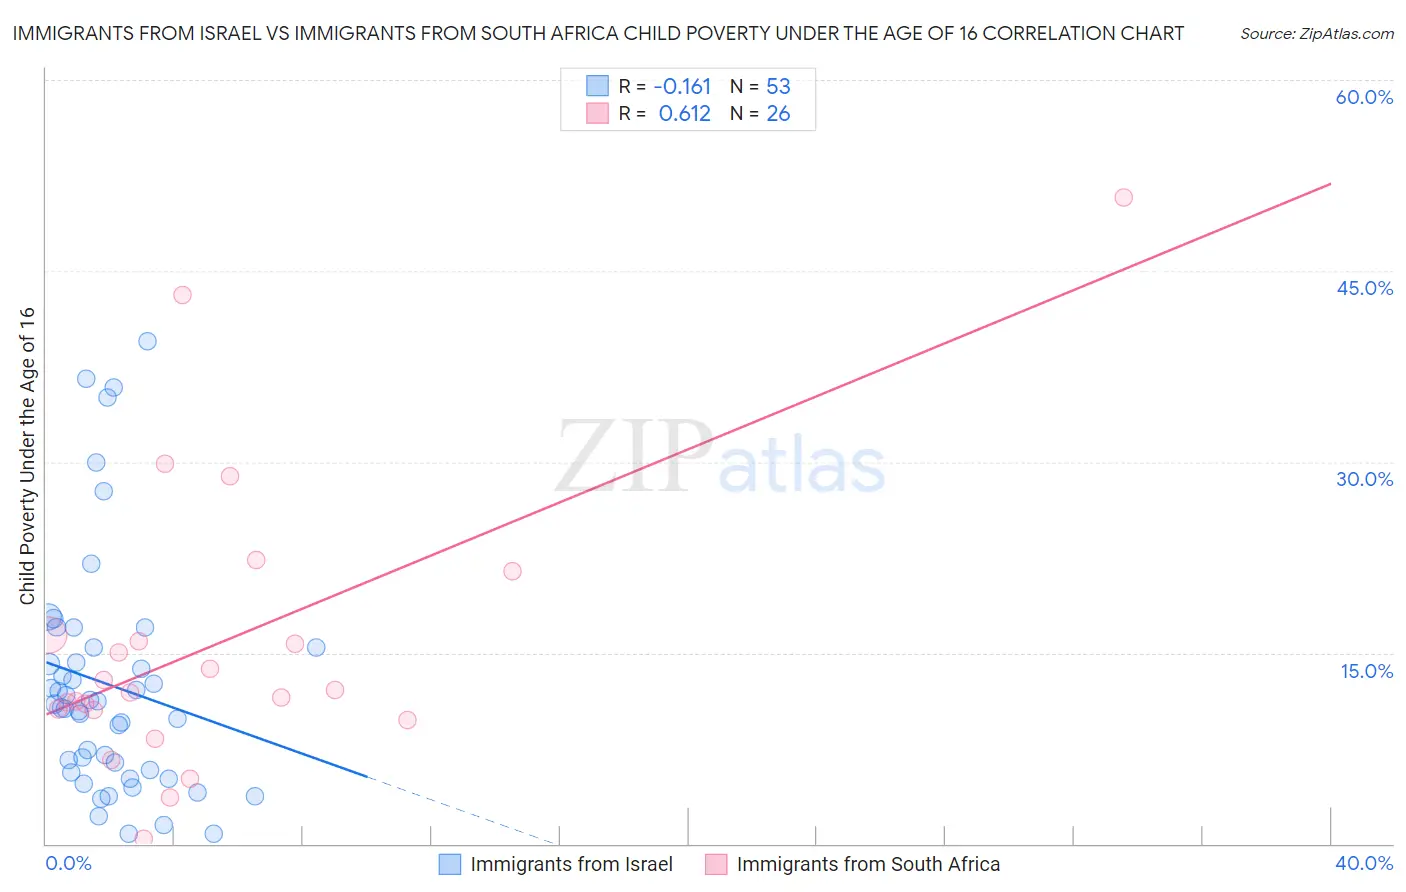 Immigrants from Israel vs Immigrants from South Africa Child Poverty Under the Age of 16